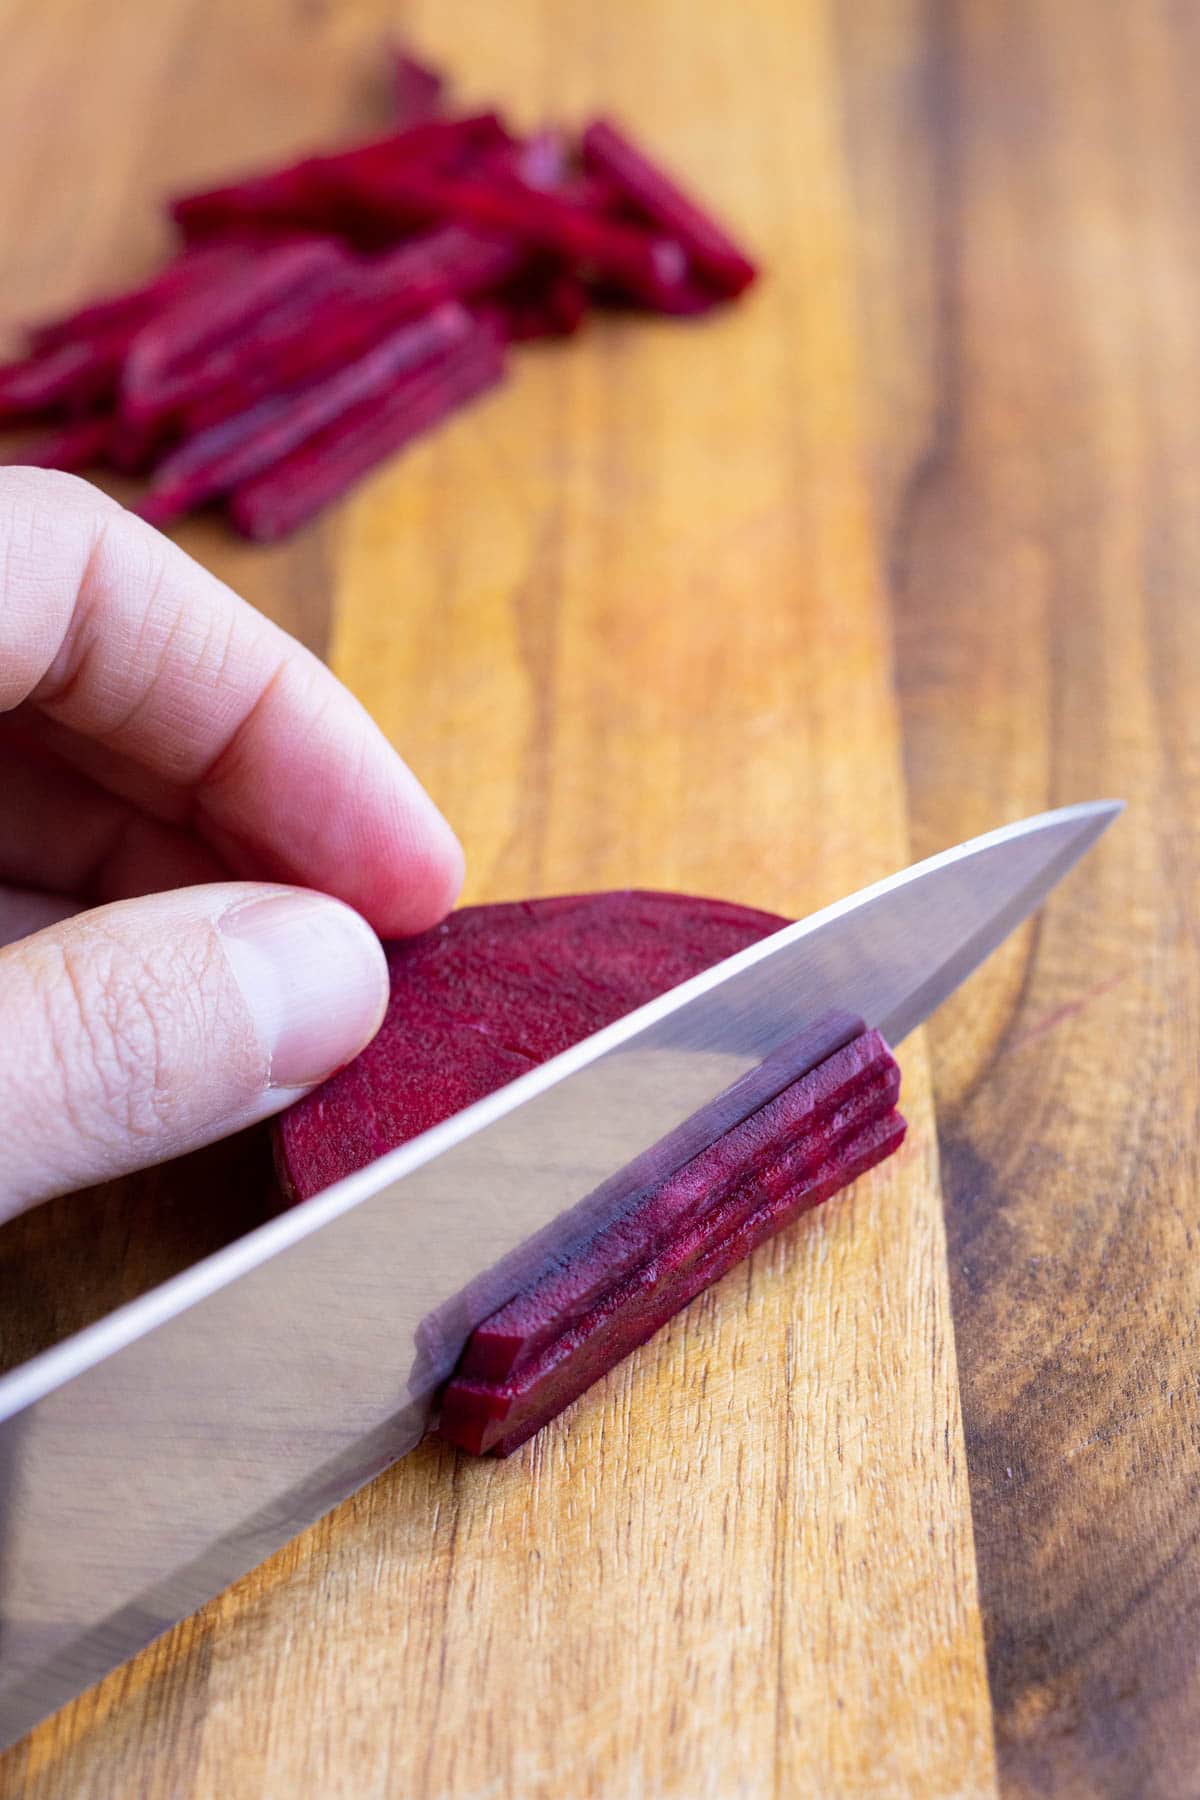 Beets are cut into thin and even strips.